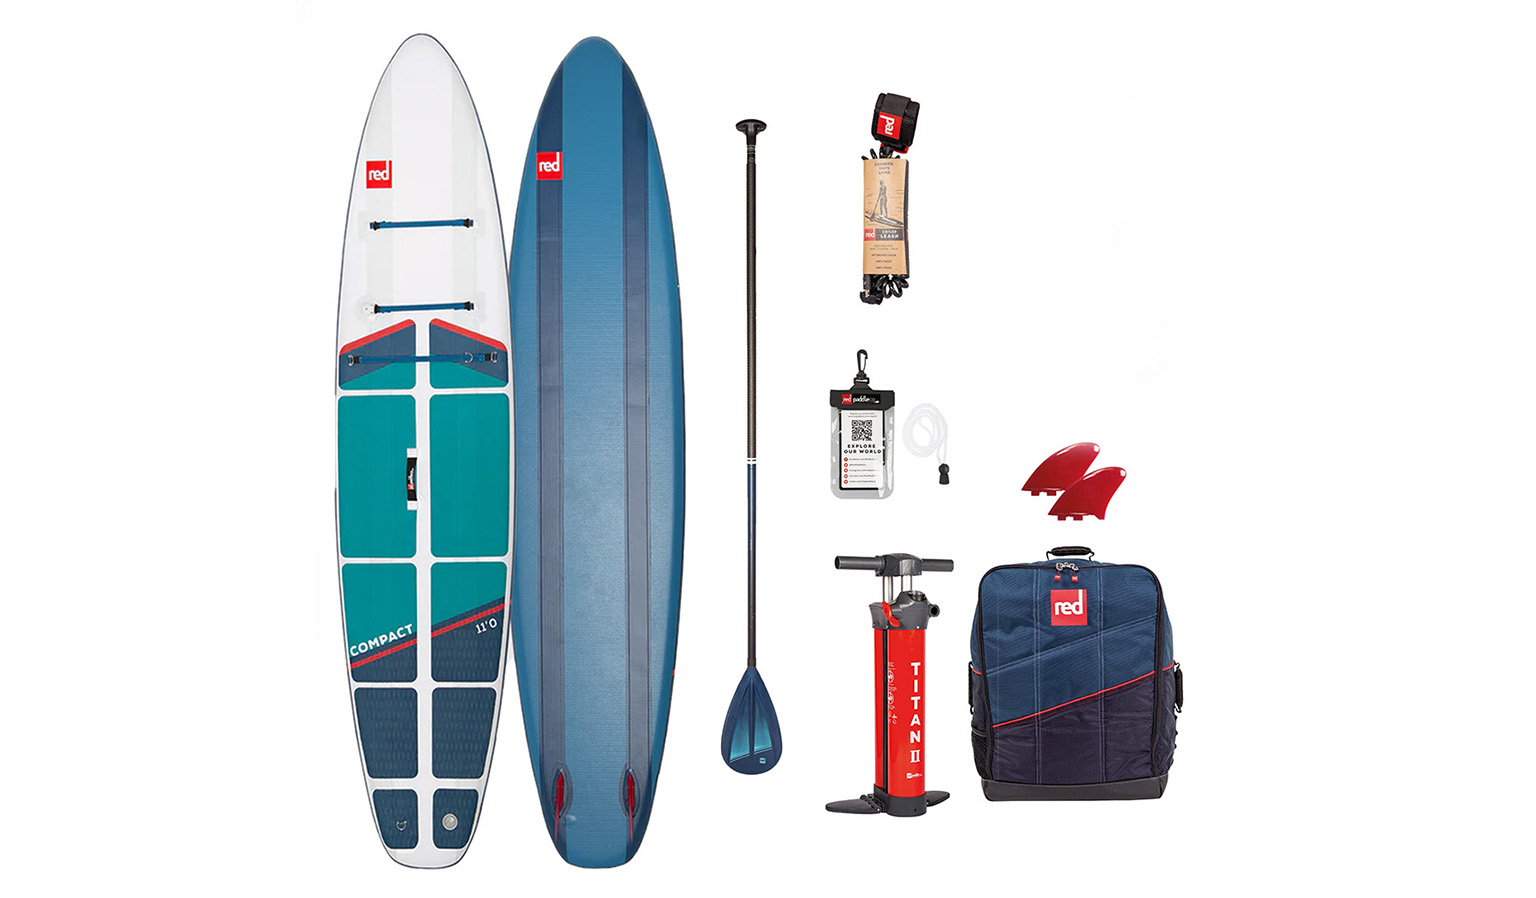 RED Paddle Co 11 Compact Package